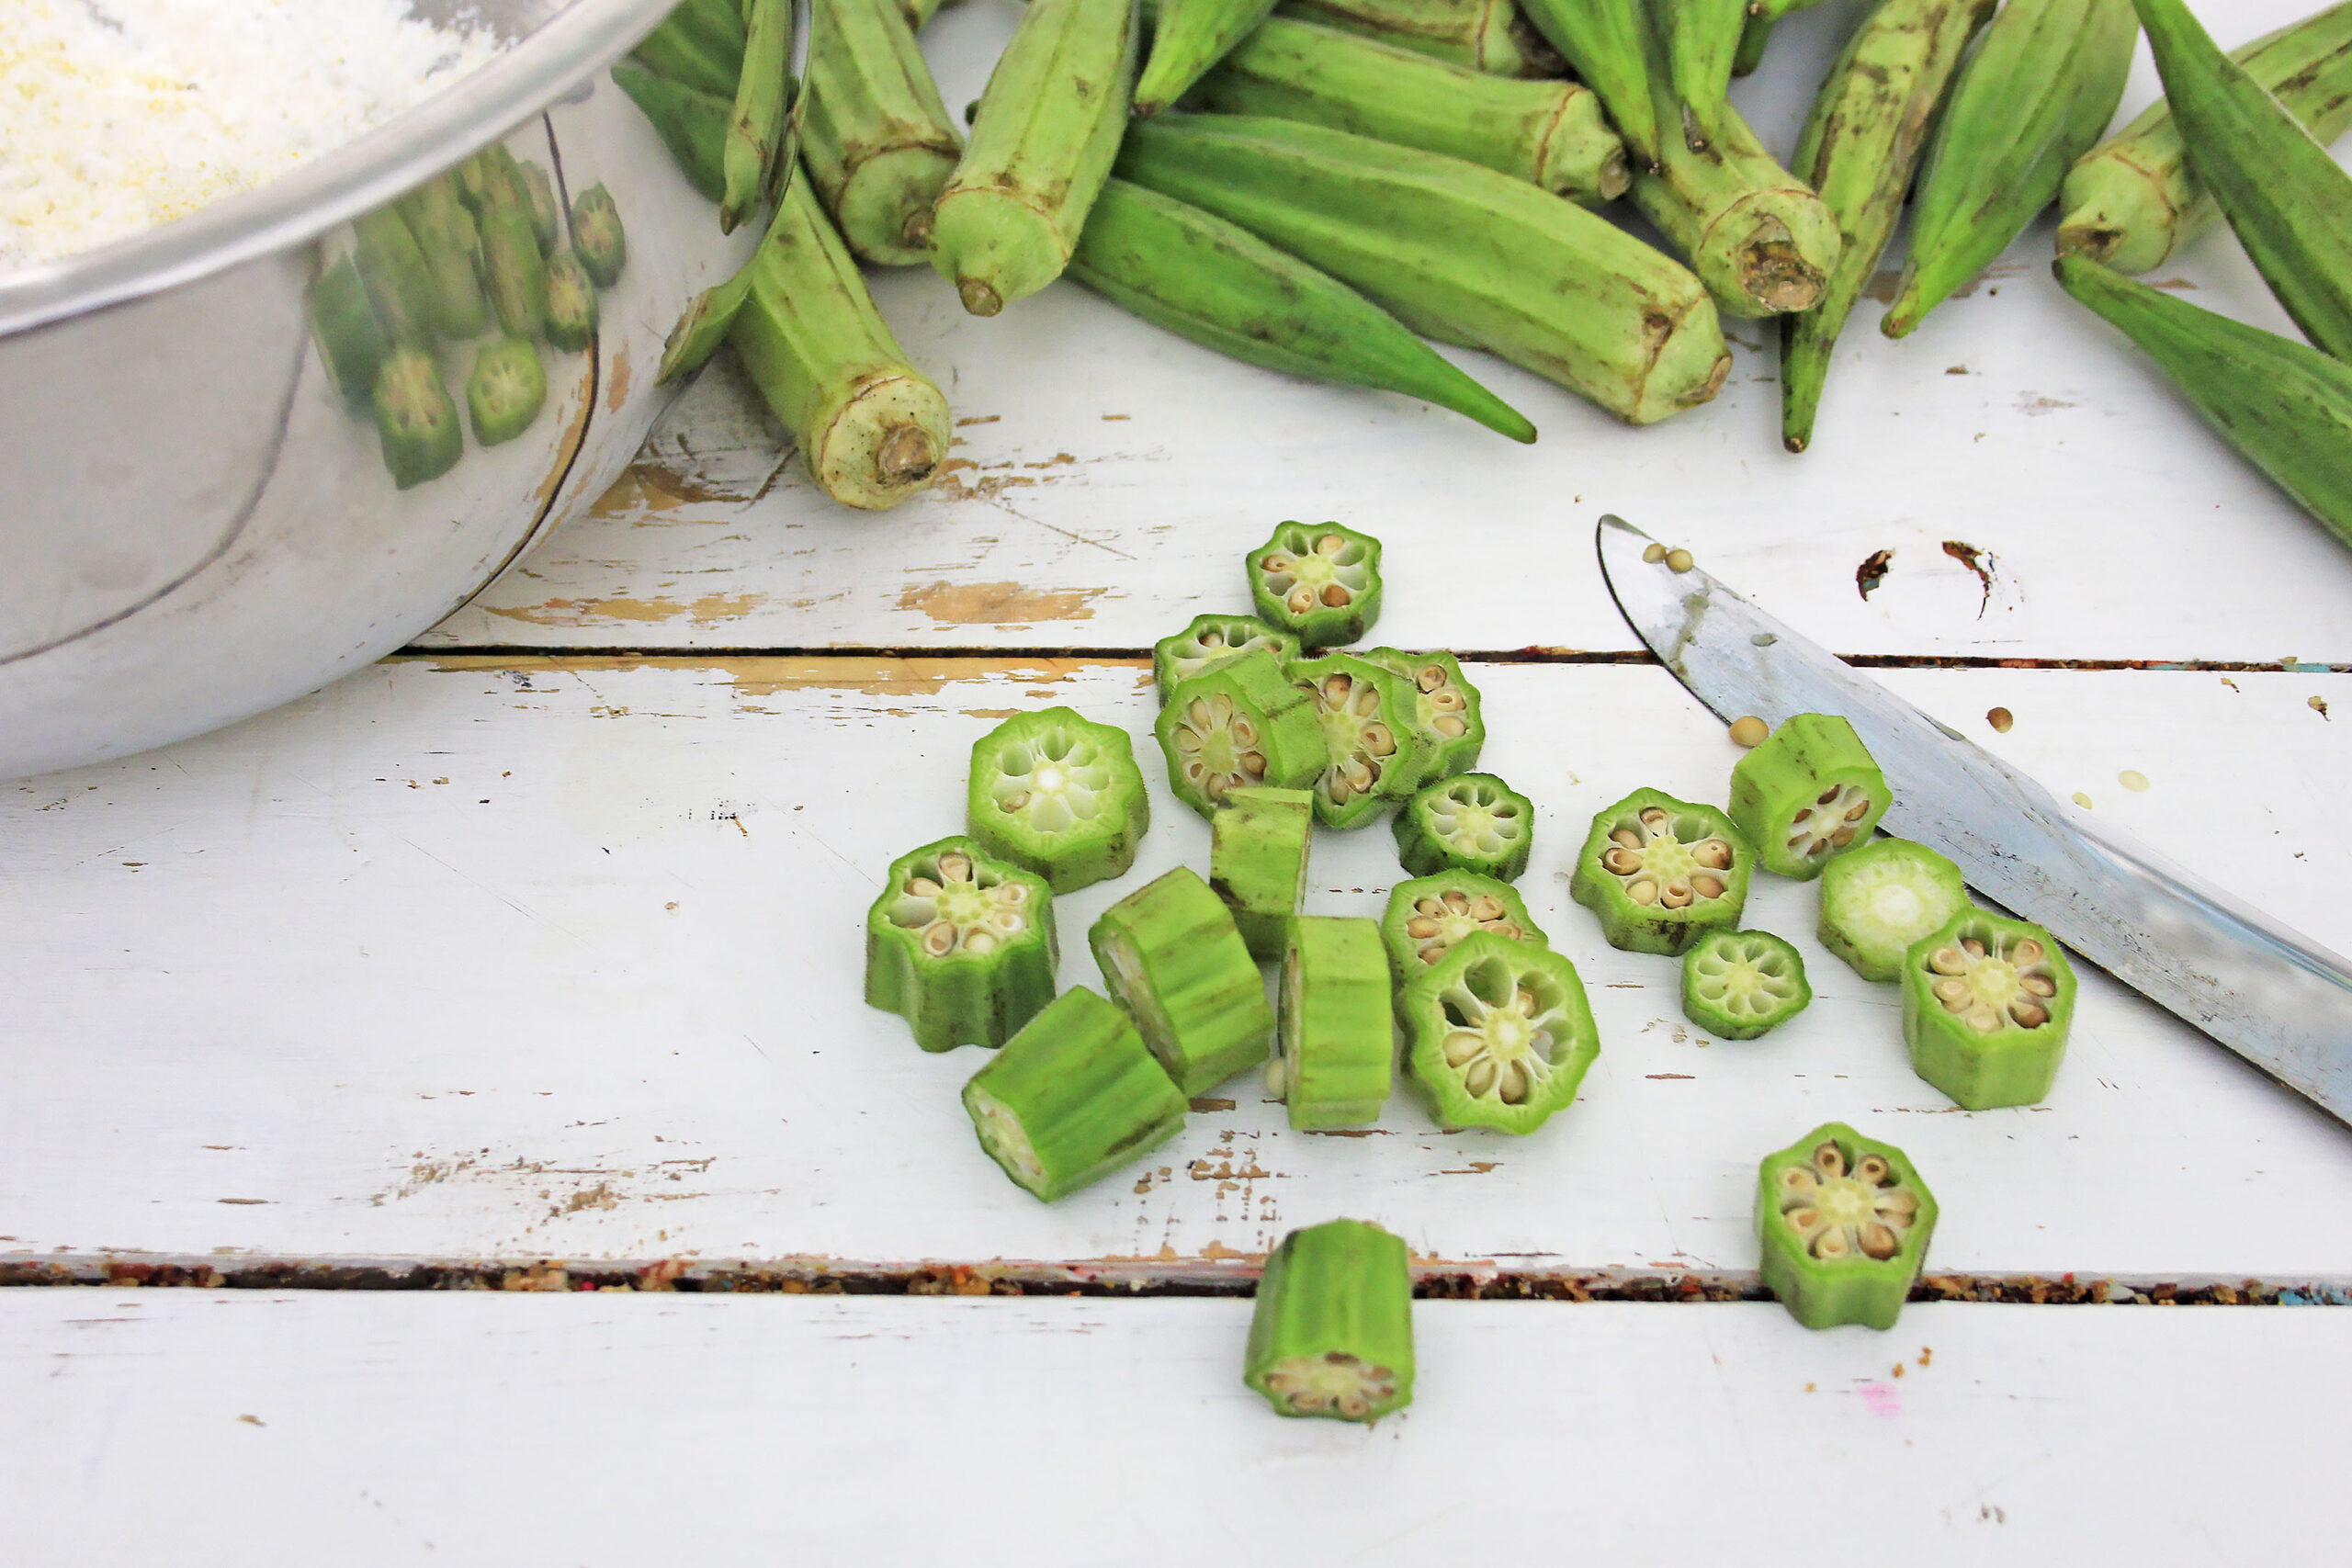 A photo of okra being sliced